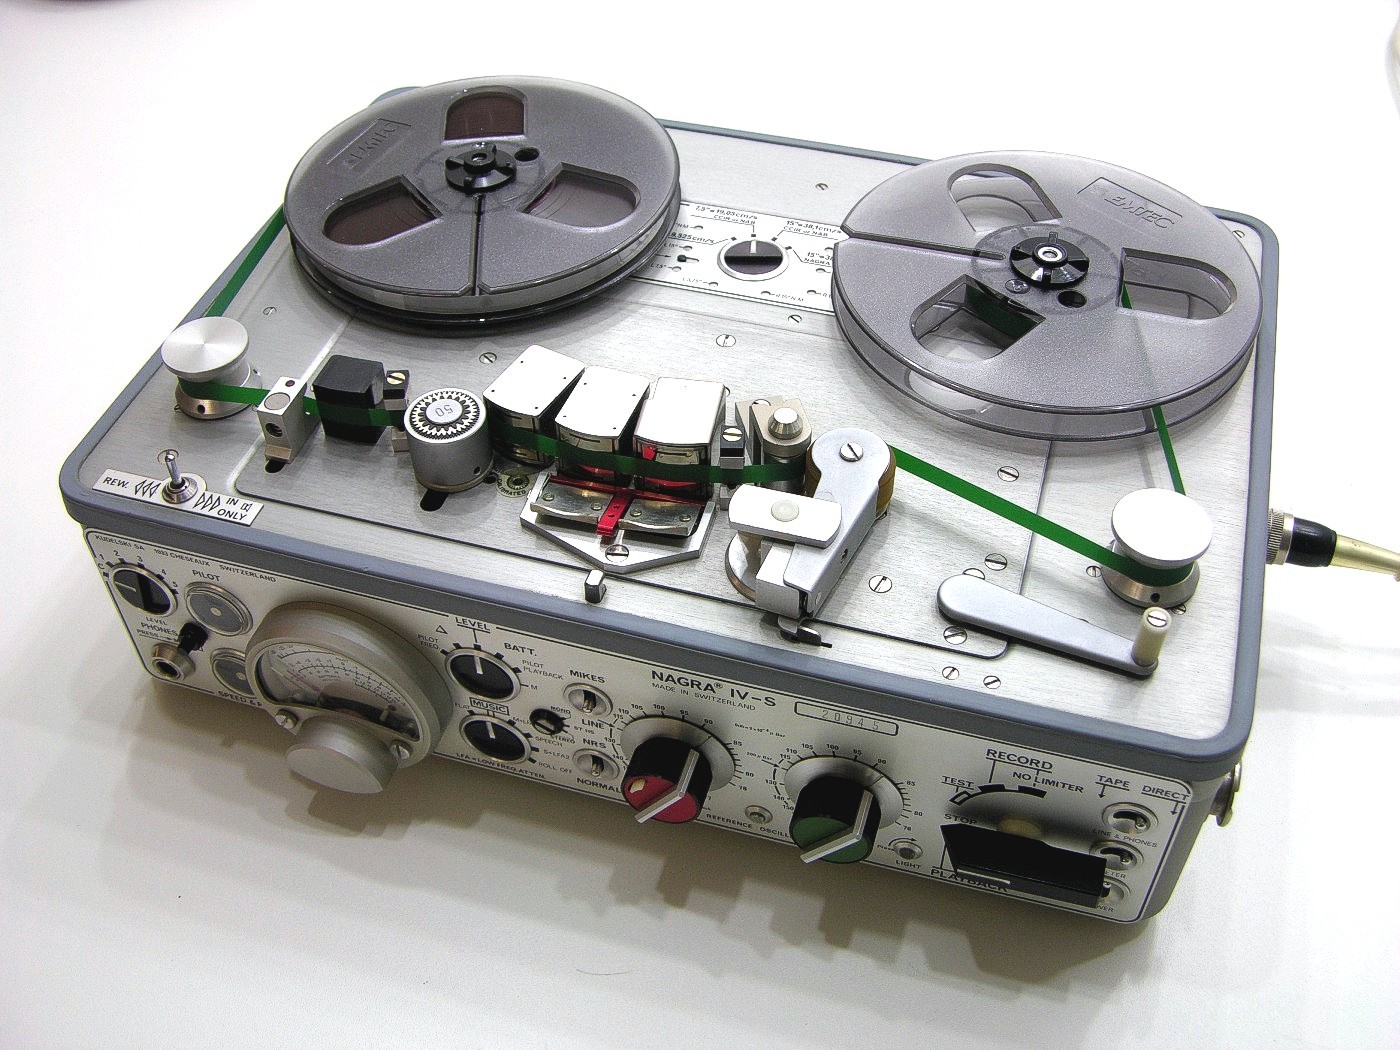 Nagra IV (IV-L and IV-D) and 4.2 - Nagra